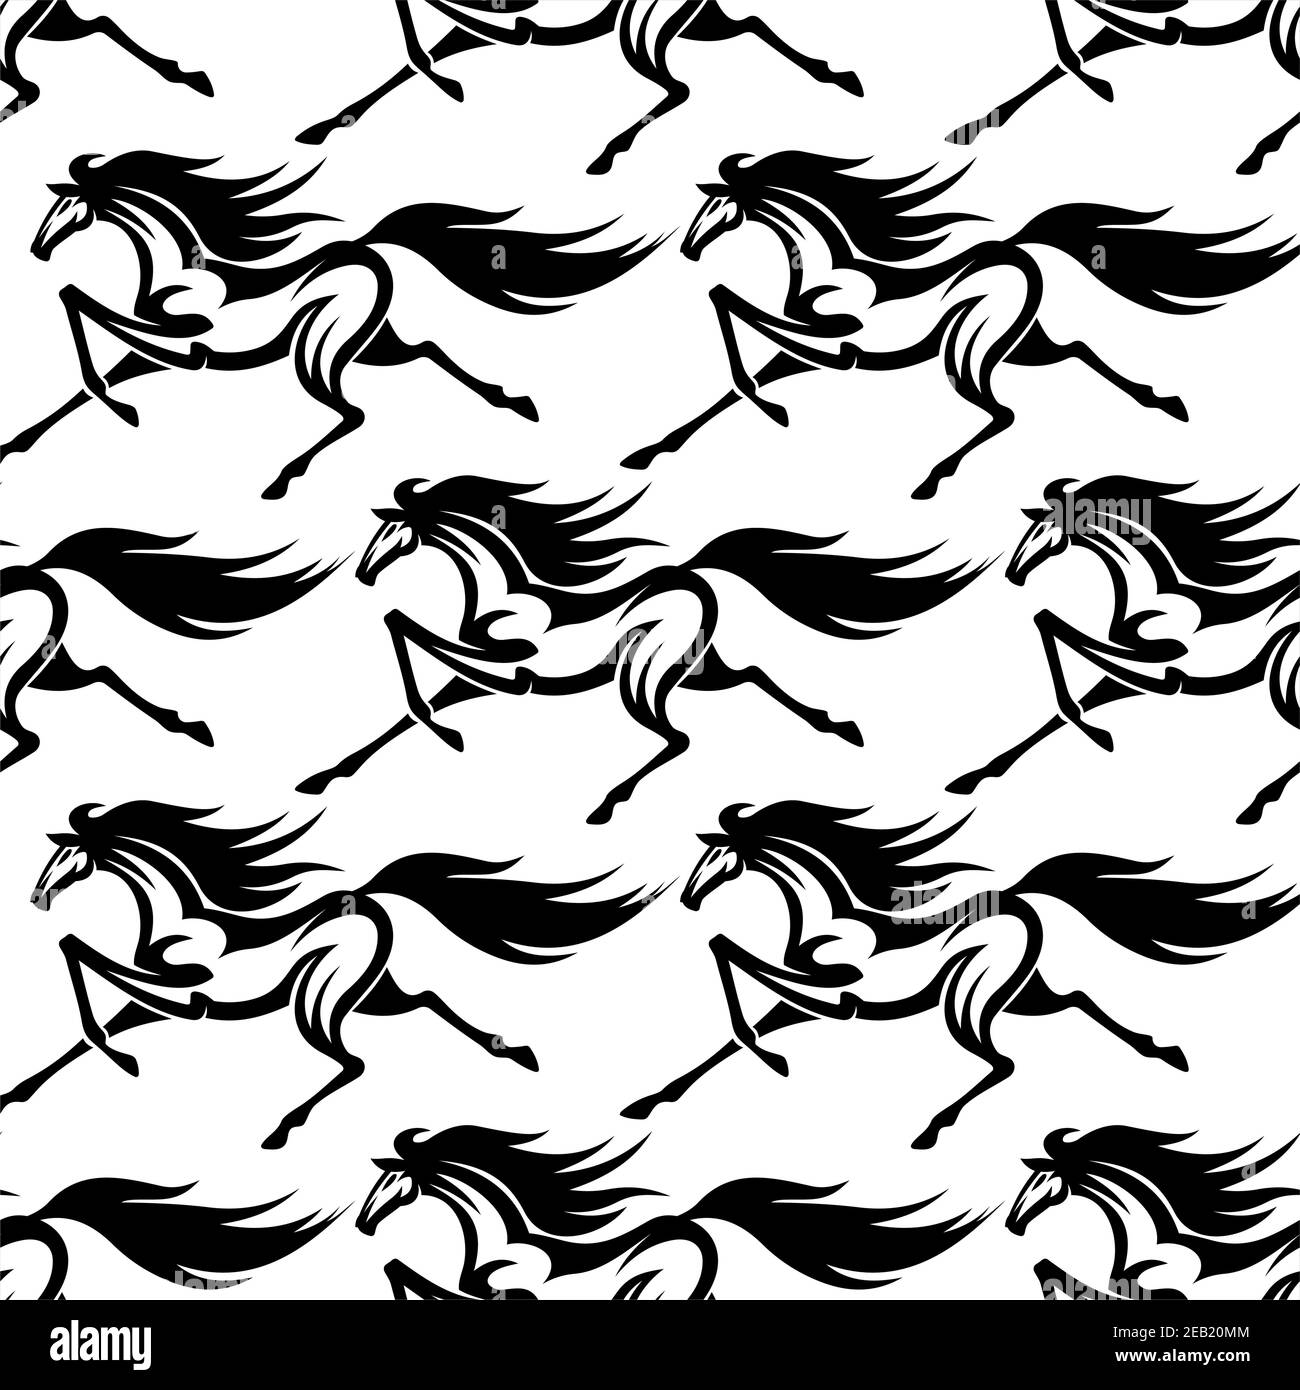 Galloping wild horses seamless pattern background in black and white colors with outlines of running horses for fabric or flyleaf design Stock Vector